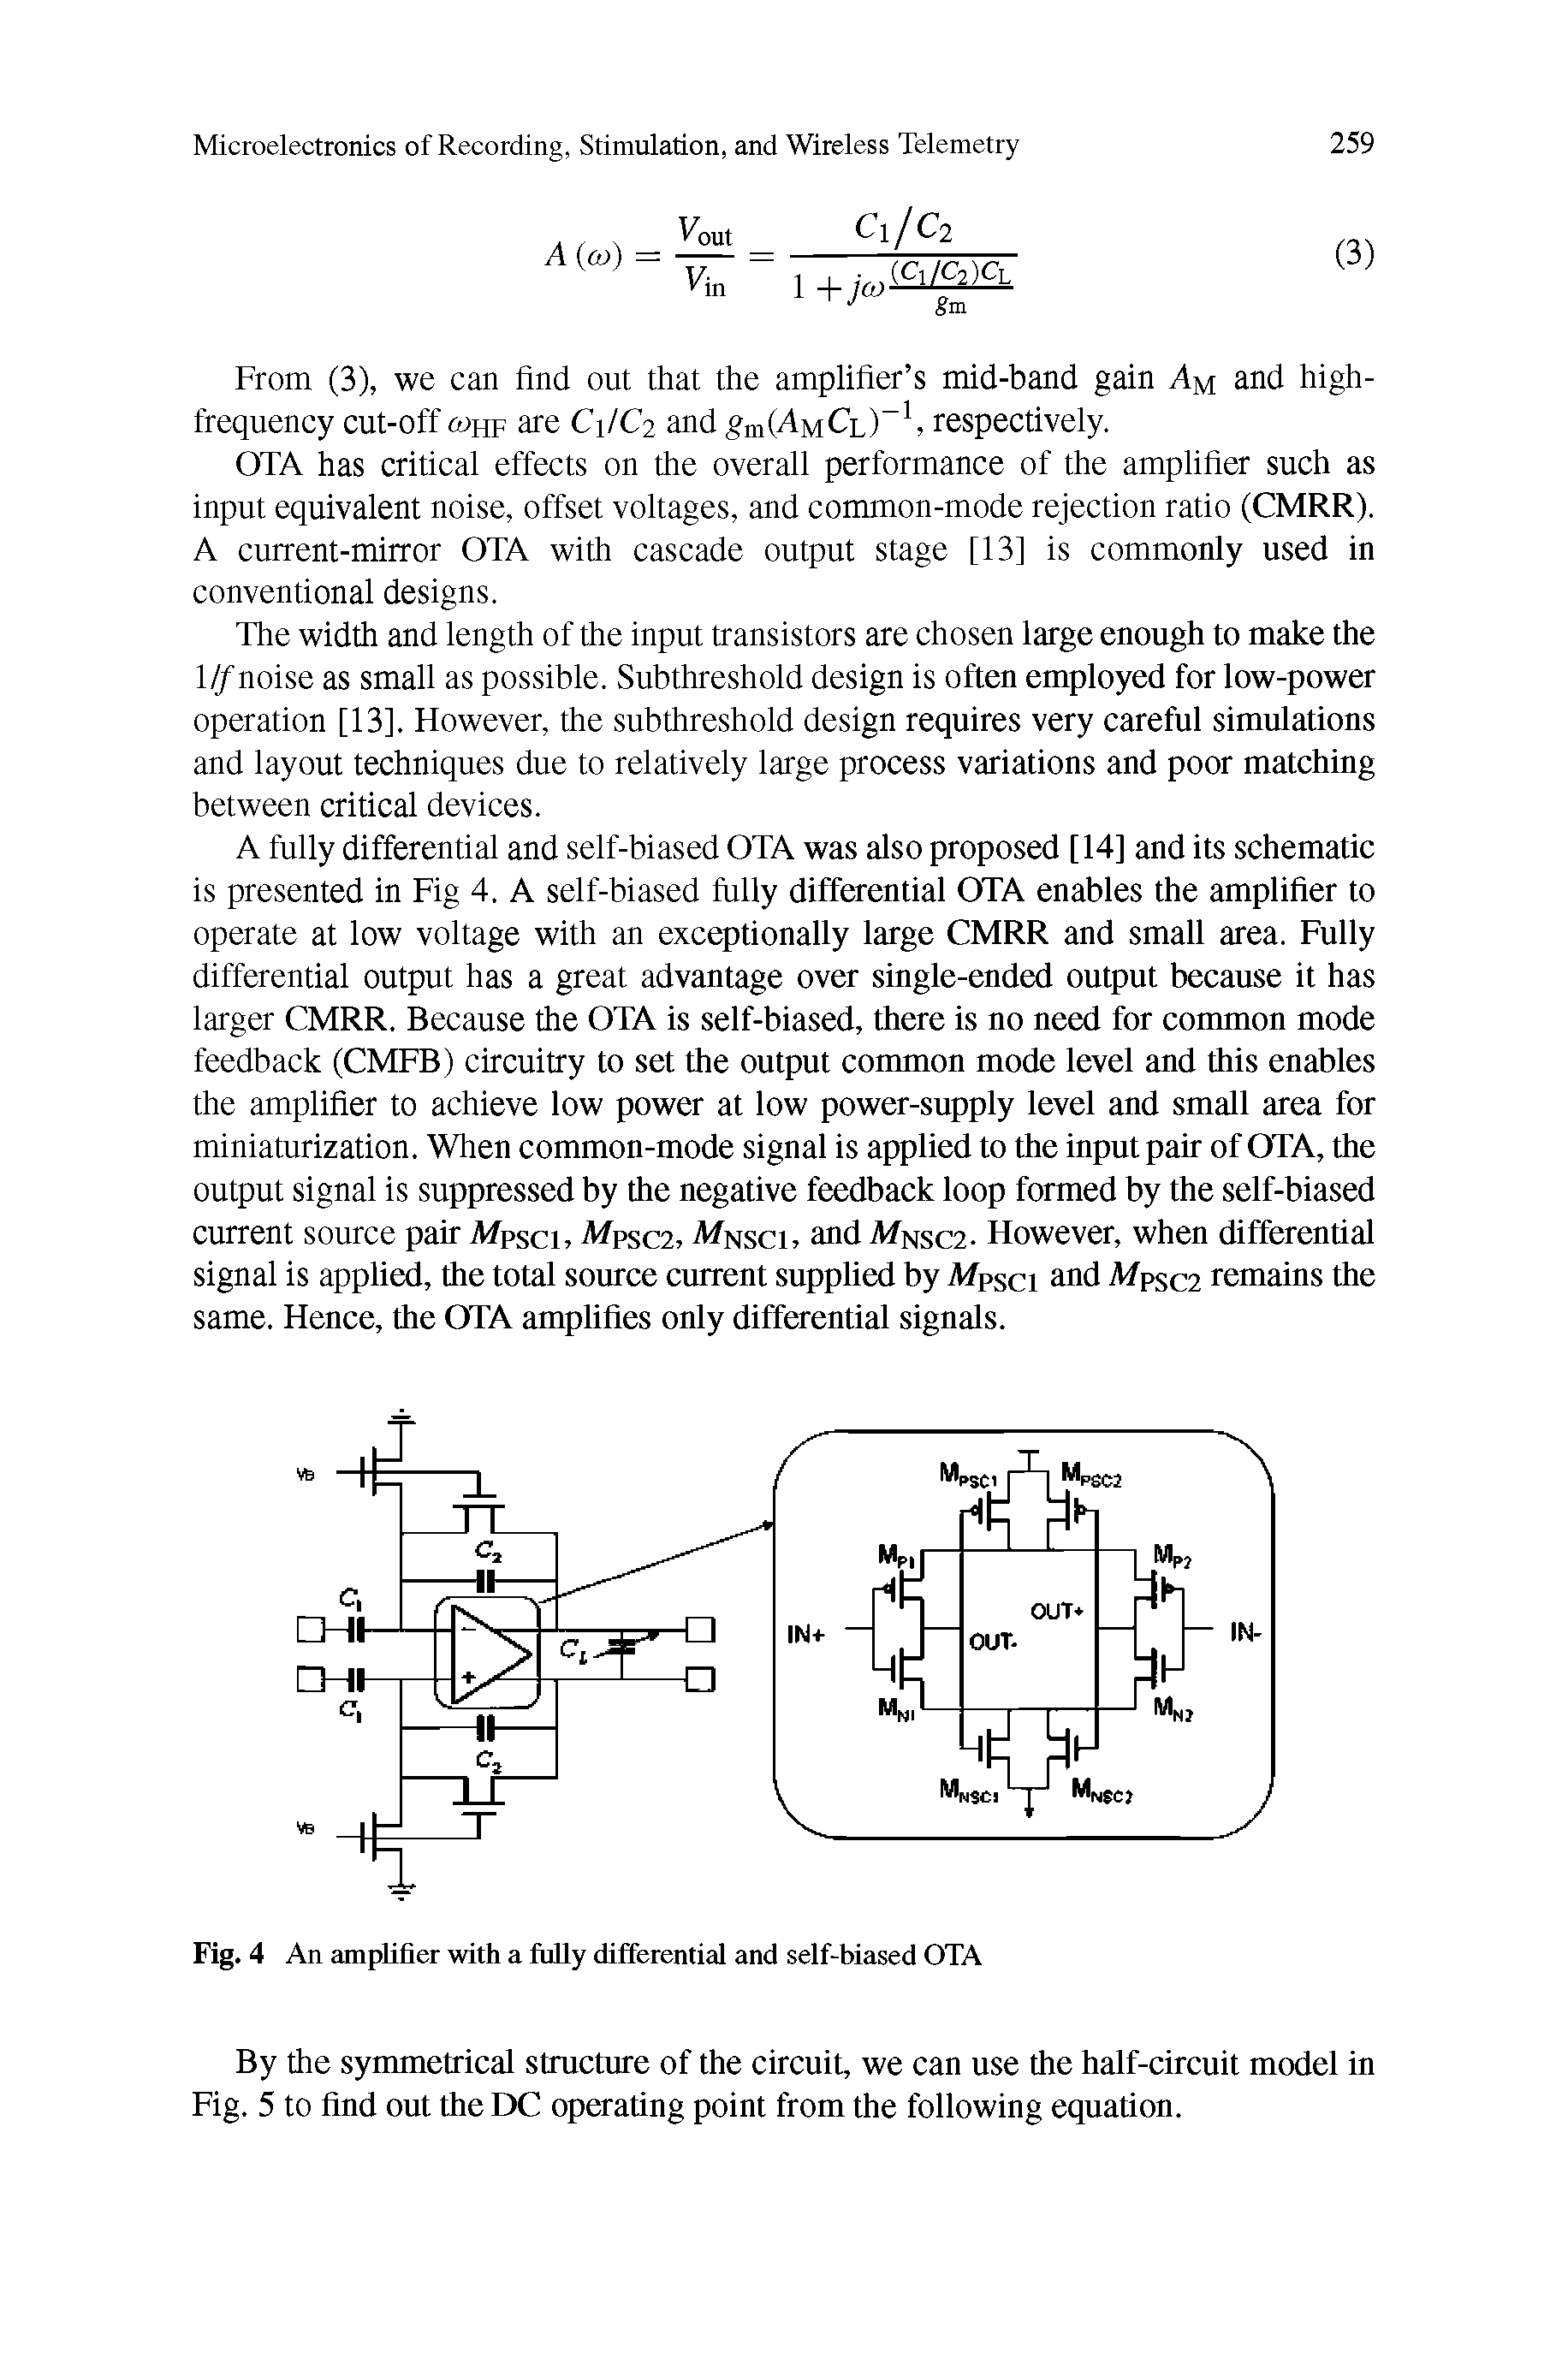 Fig. 4 An amplifier with a fully differential and self-biased OTA...